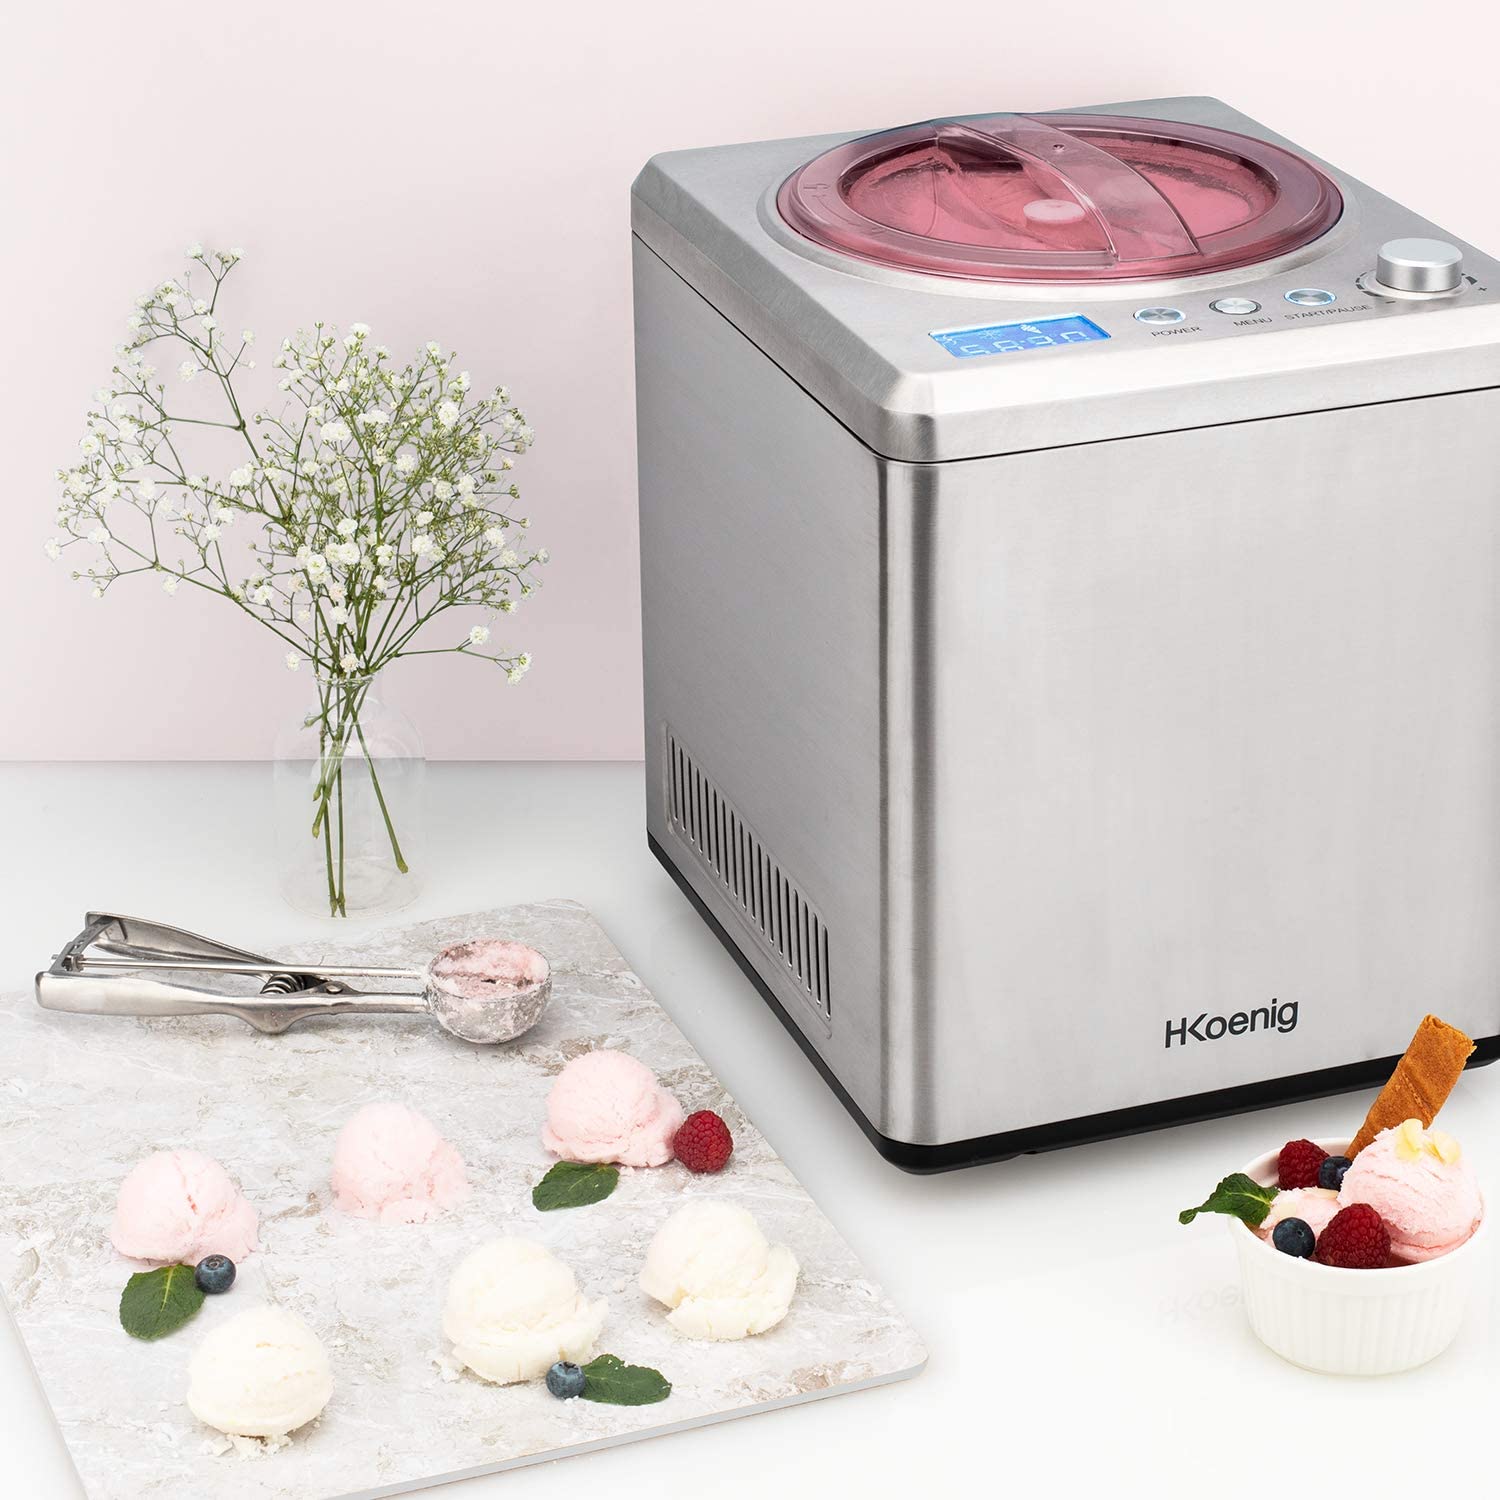 H.Koenig Professional Electric Ice Maker HF320 2 l 180 W Cooling Function Quick Preparation Ice Cream, Frozen Yoghurt and Sorbet